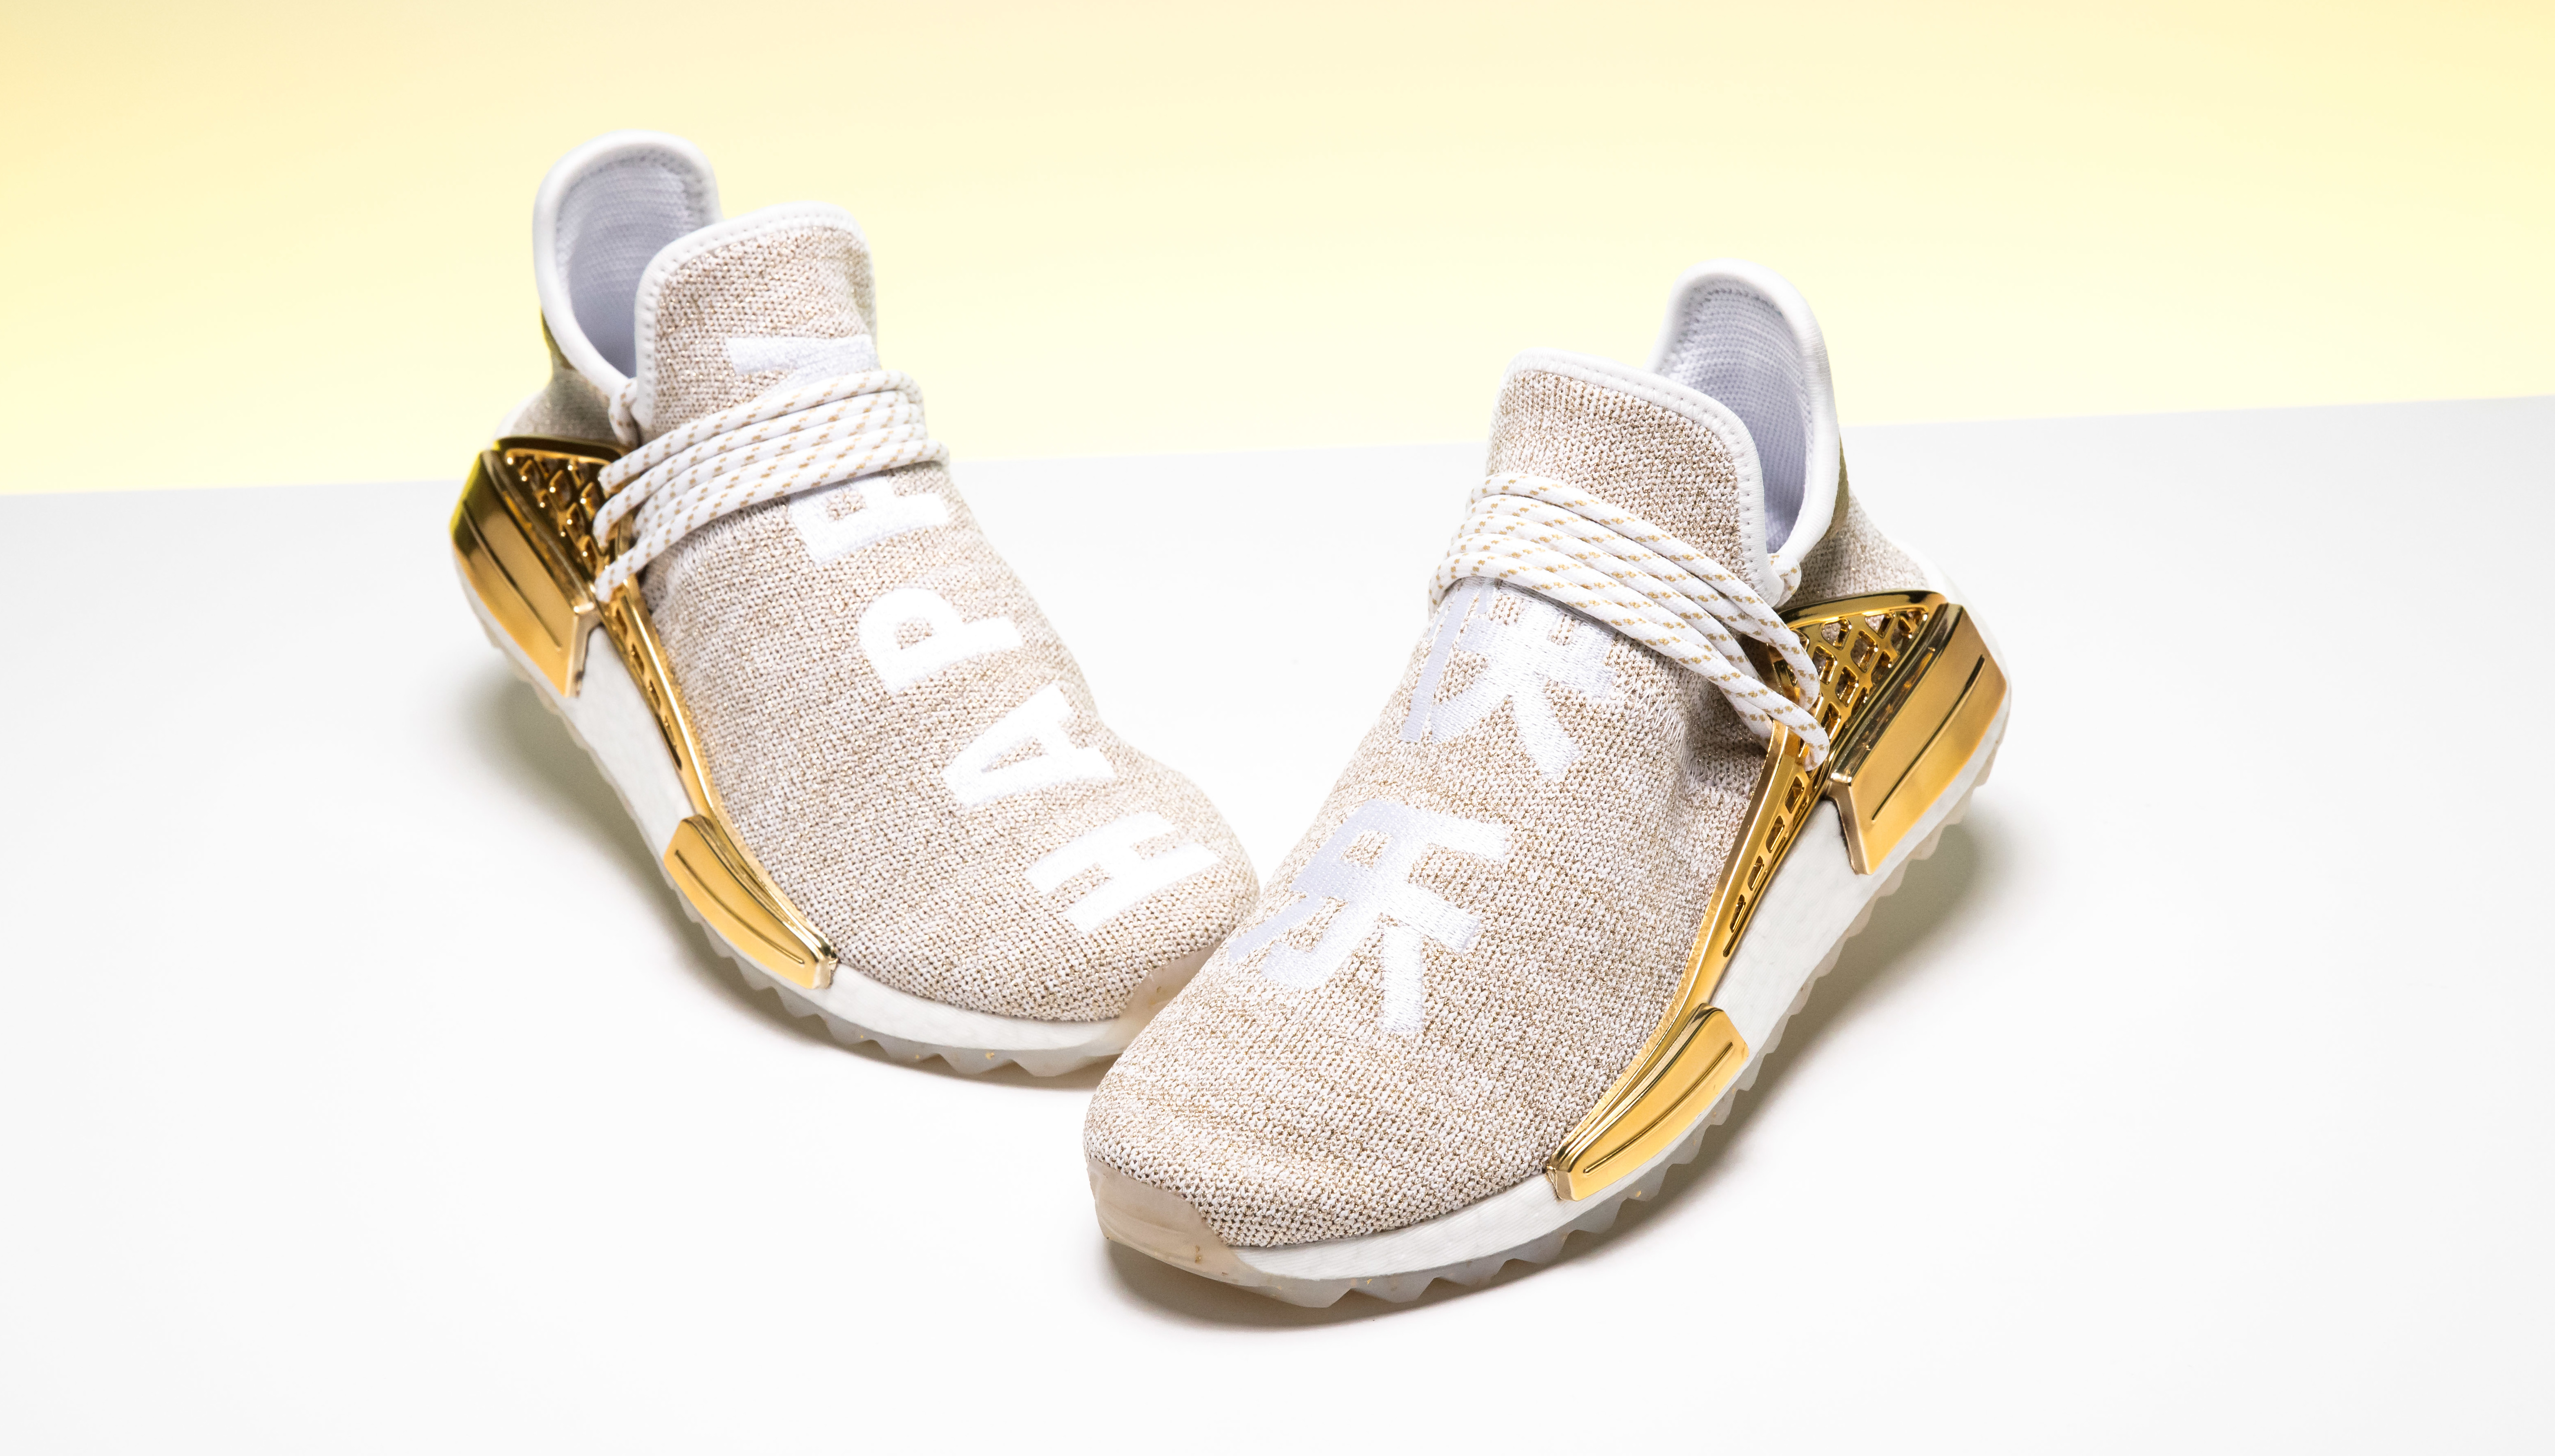 gold nmds